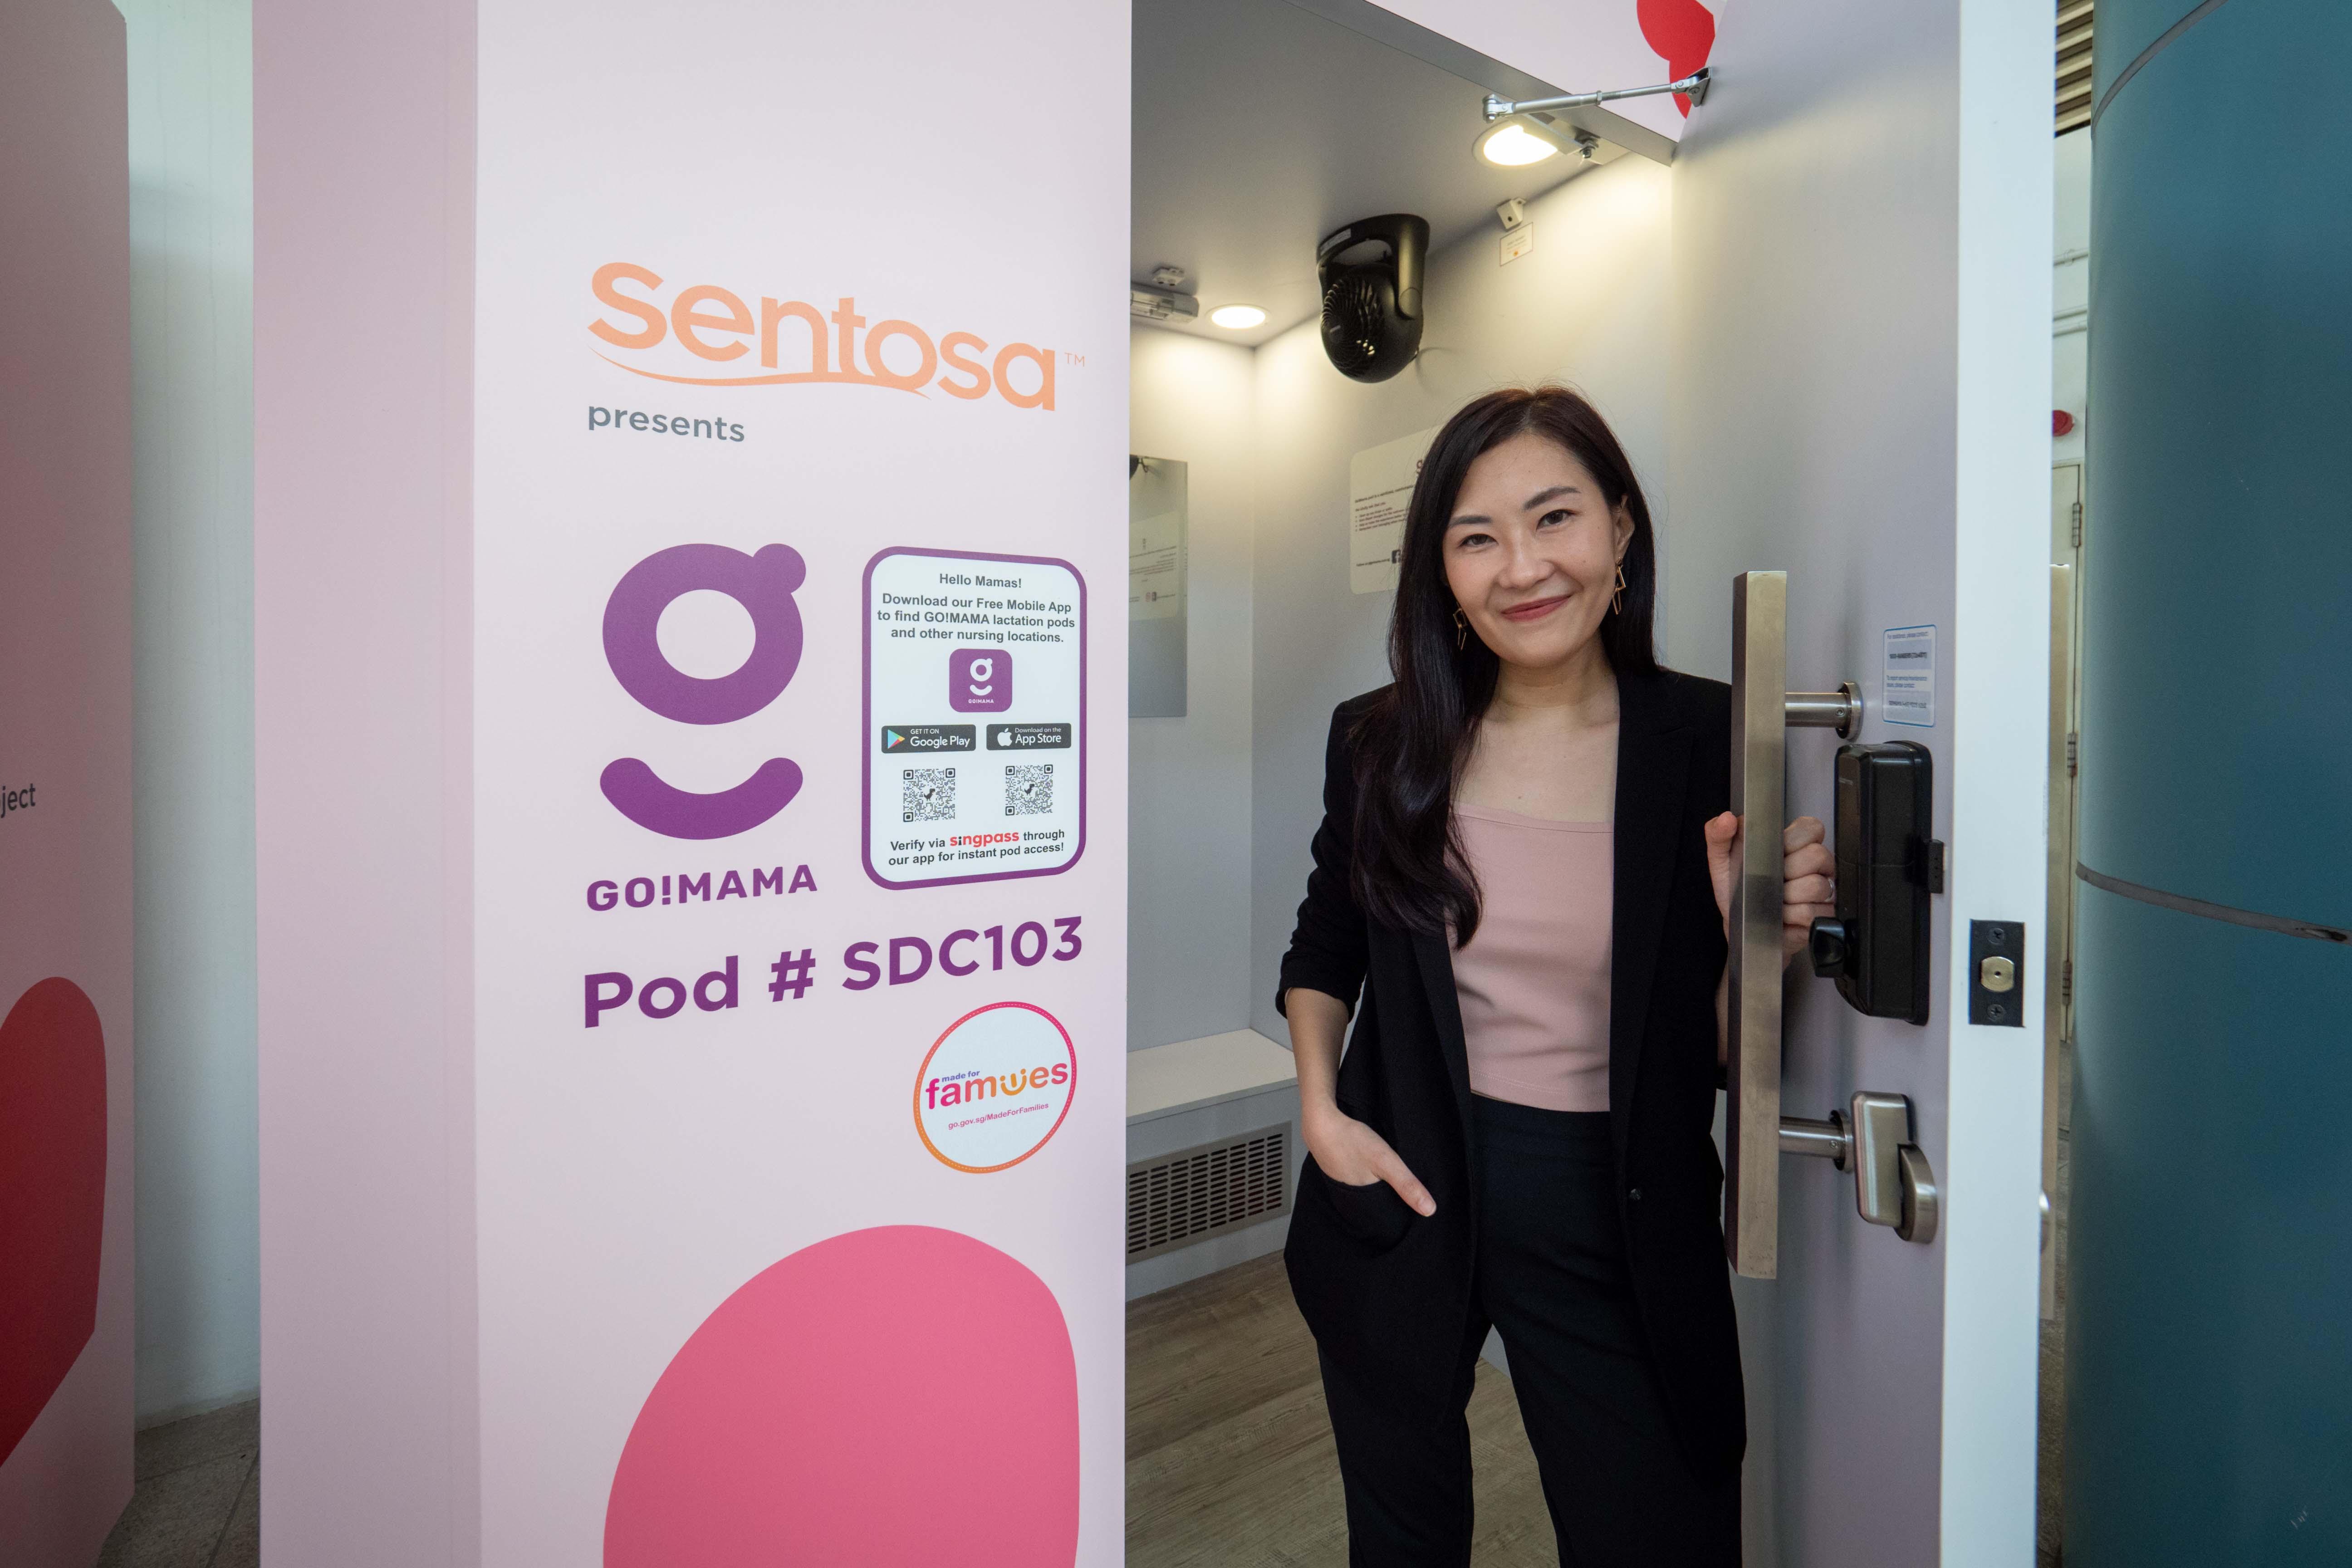 Ms Vivian Lee took a leap as a first-time entrepreneur during the Covid-19 pandemic and, with support from some agencies, has built a successful startup.